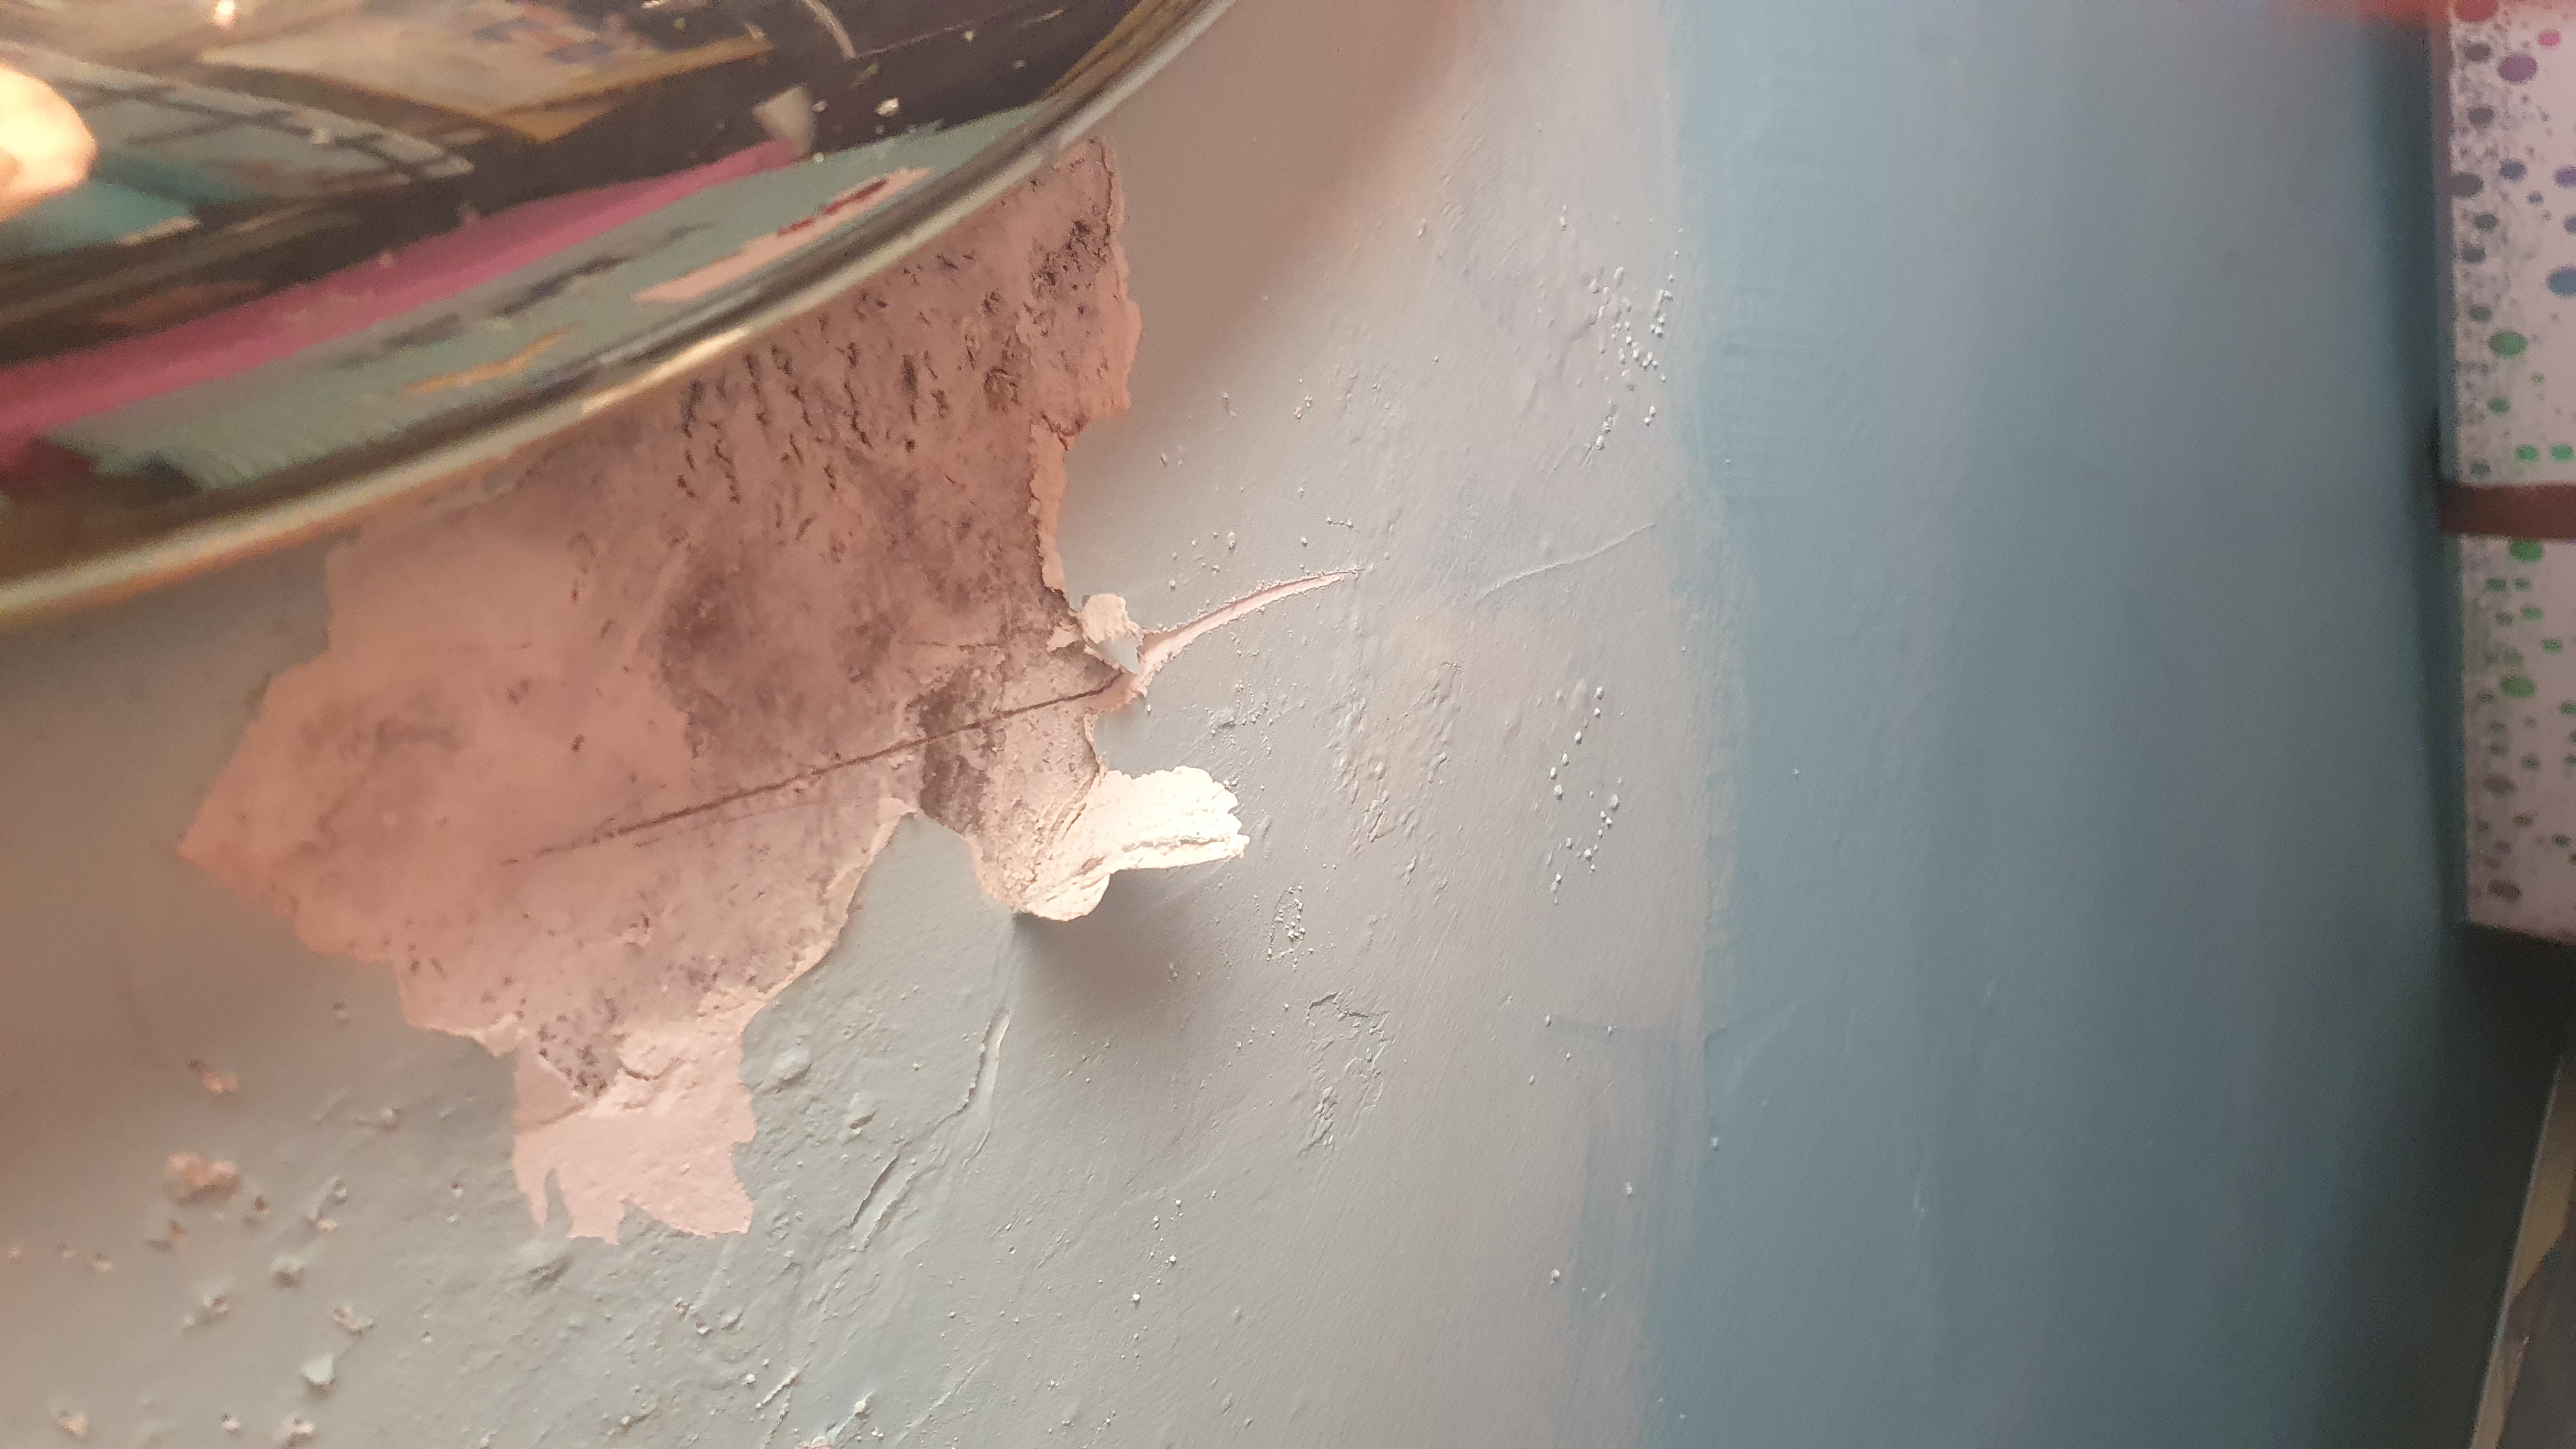 SP52948-Lot-158-damaged-ceiling-near-electrical-lighting-due-to-water-leaks-unrepaired-since-Sep2020-photo-4-taken-3Feb2022.jpg